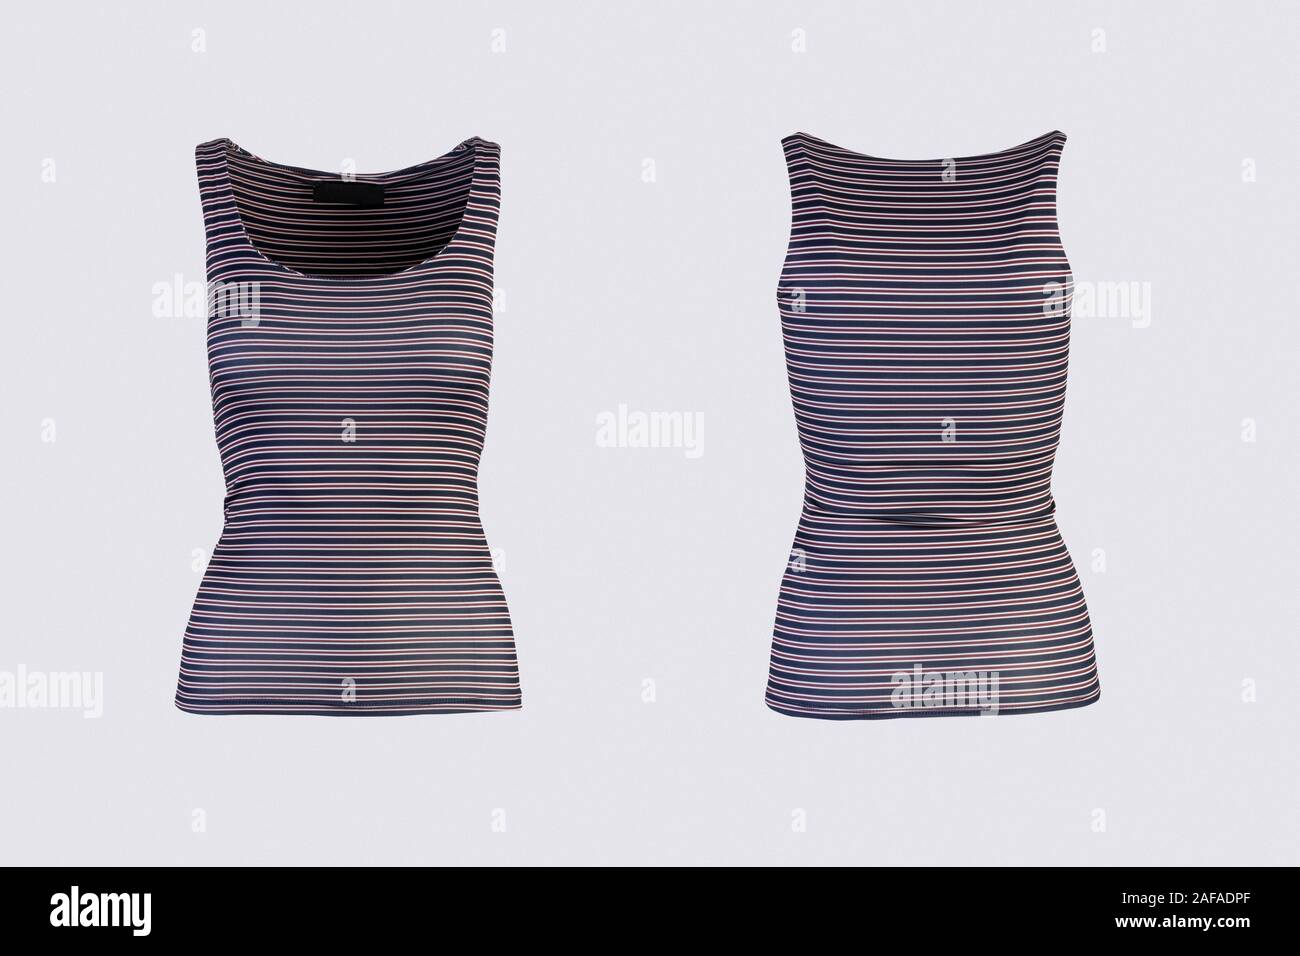 Striped tank top isolated on white background front and back view Stock Photo